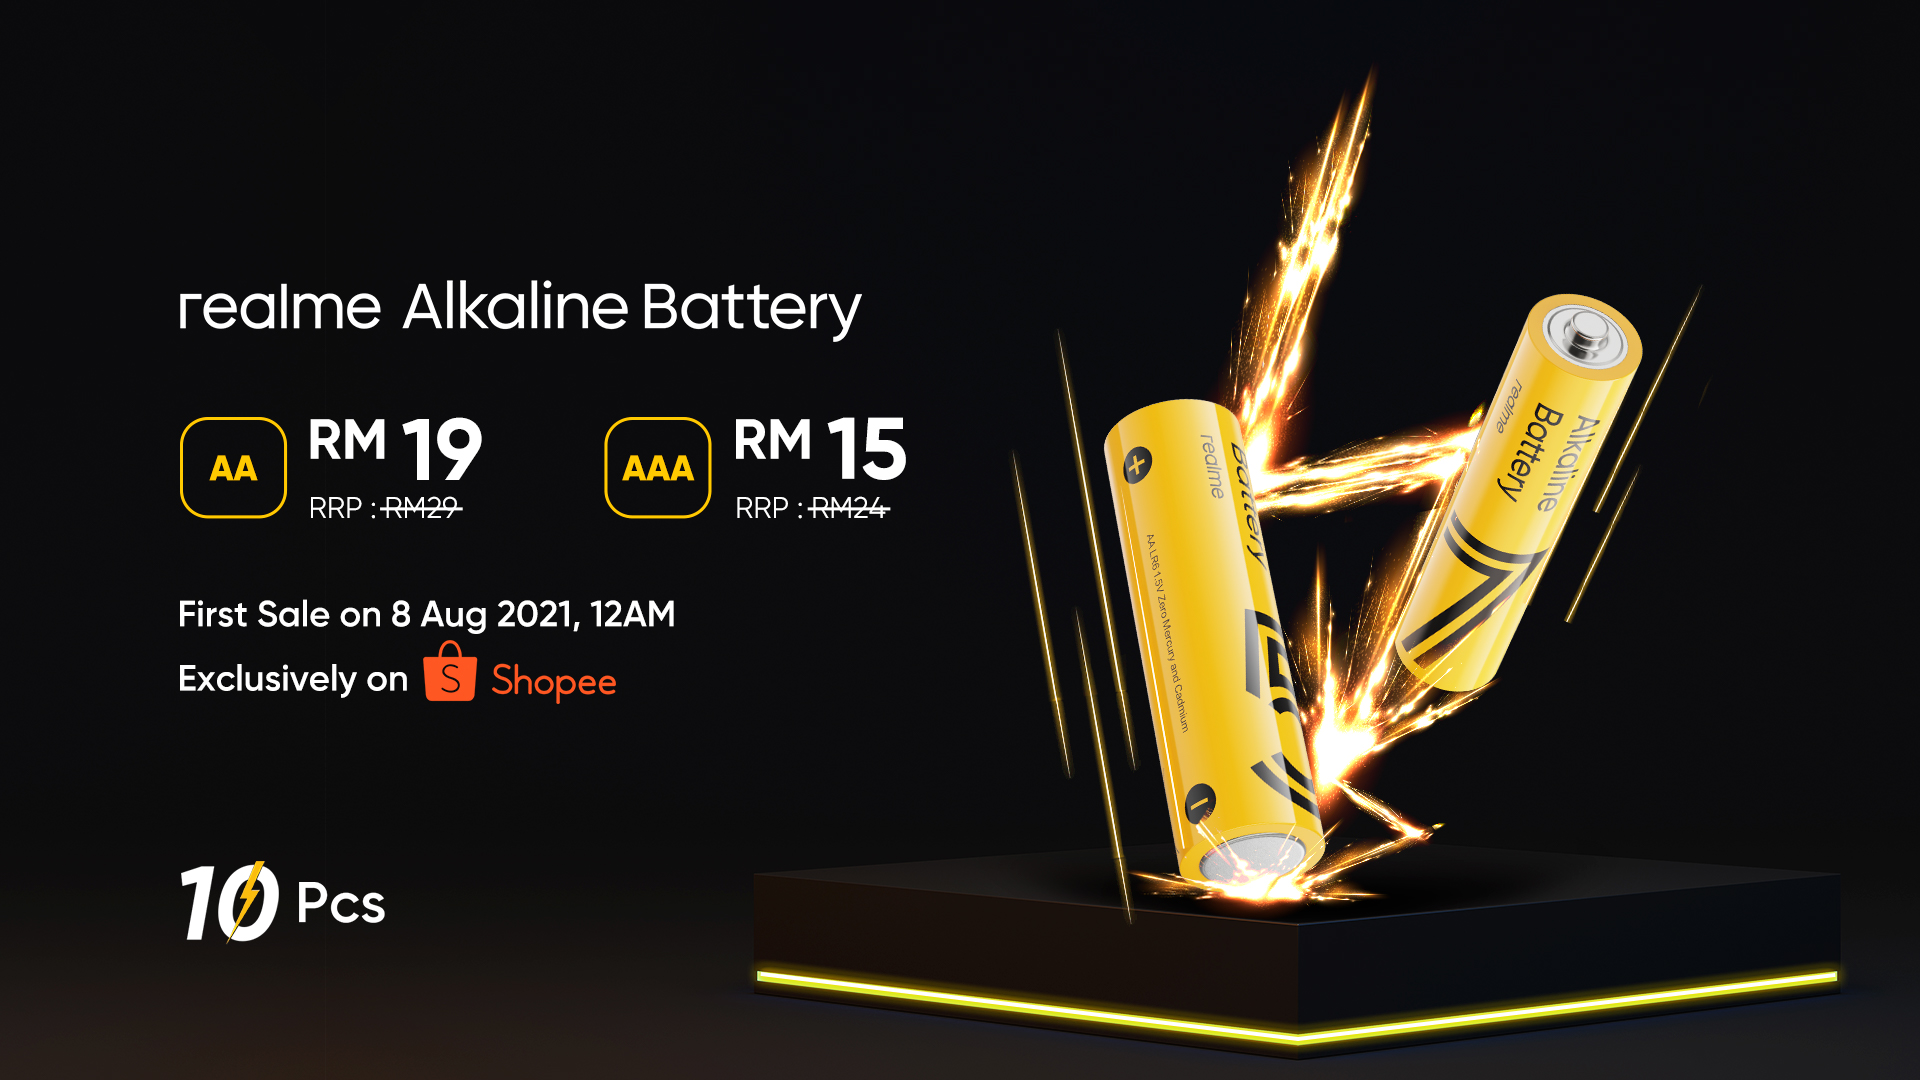 Visual realme Alkaline Battery First Sale on Shopee